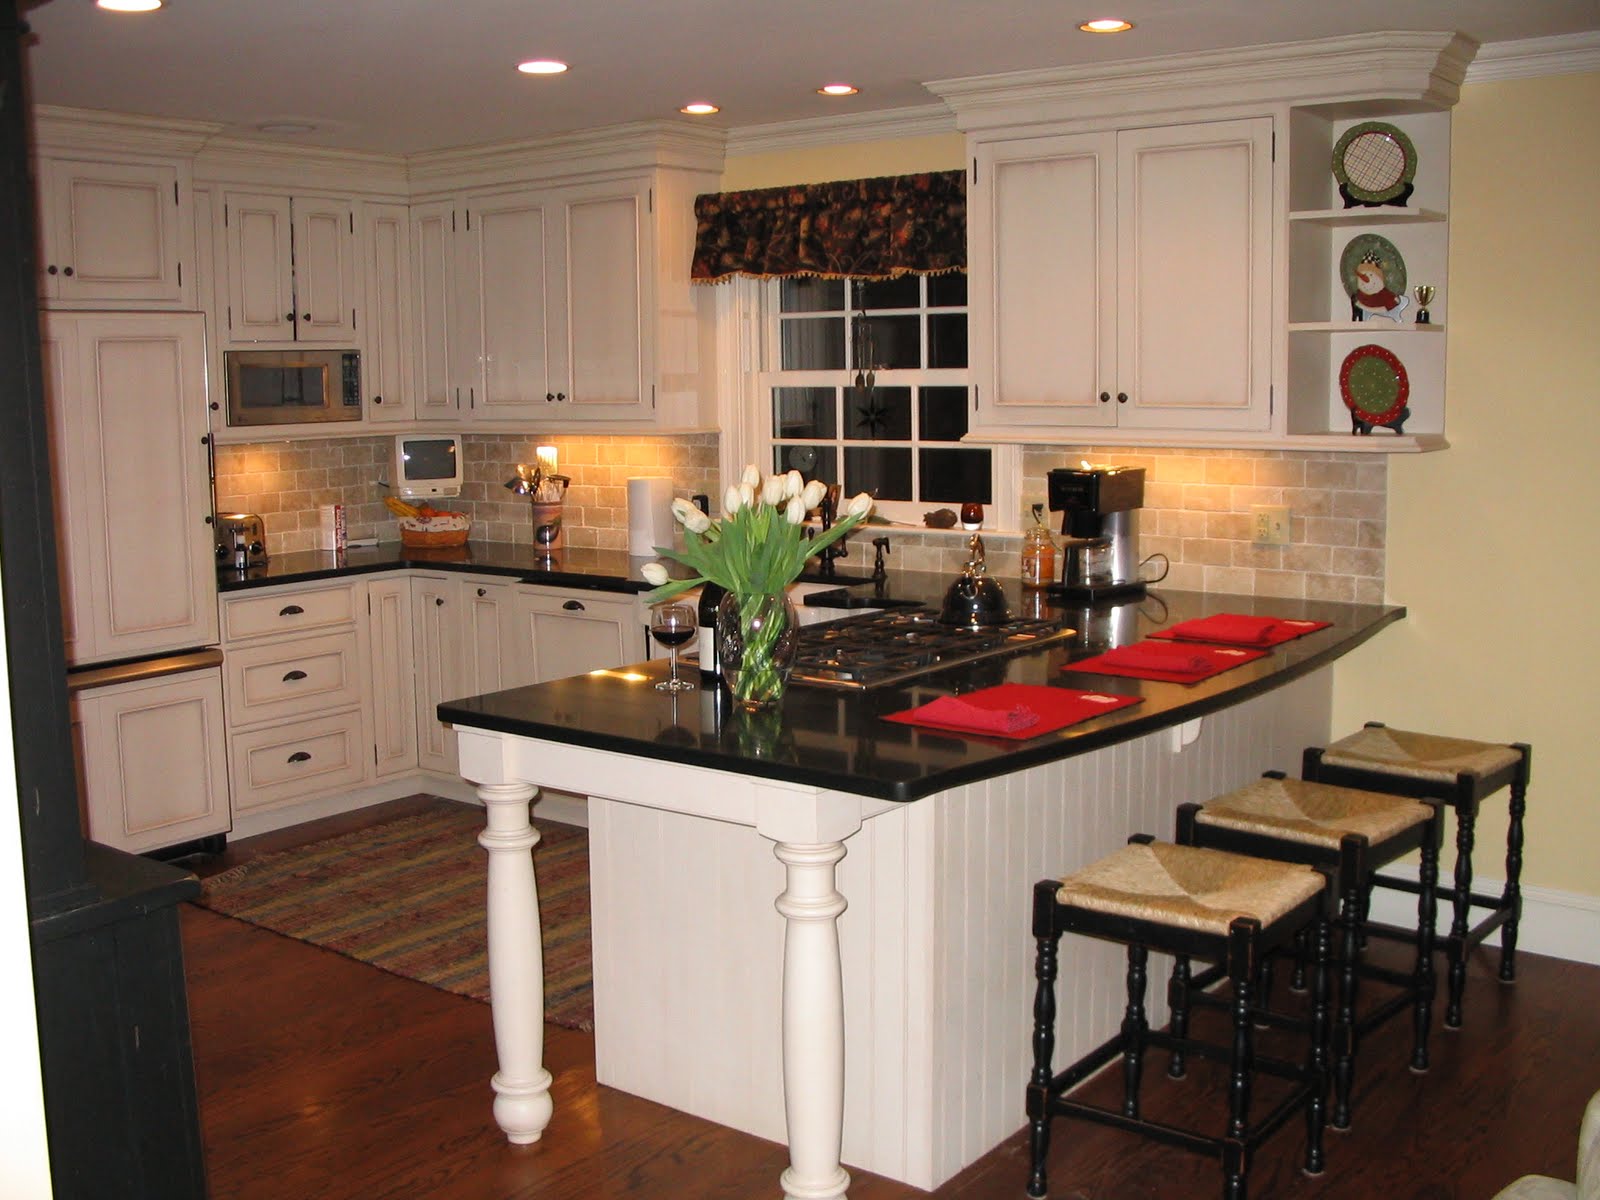 5 Tips for Refinishing Kitchen Cabinets - A Concord Carpenter